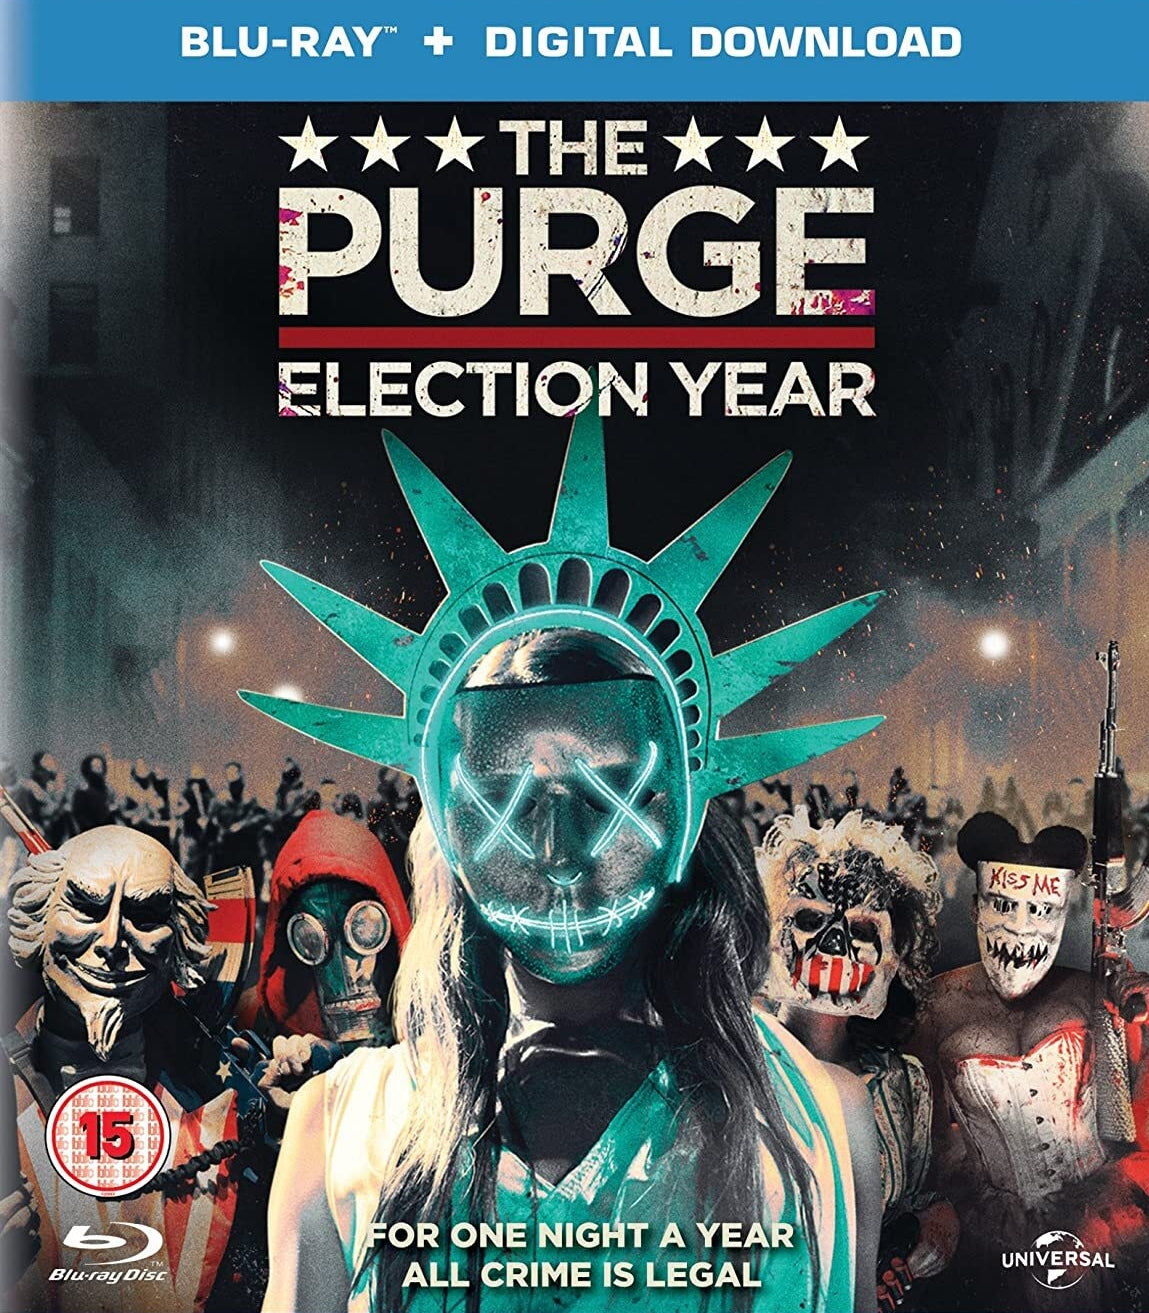 THE PURGE: ELECTION YEAR (REGION FREE IMPORT) BLU-RAY